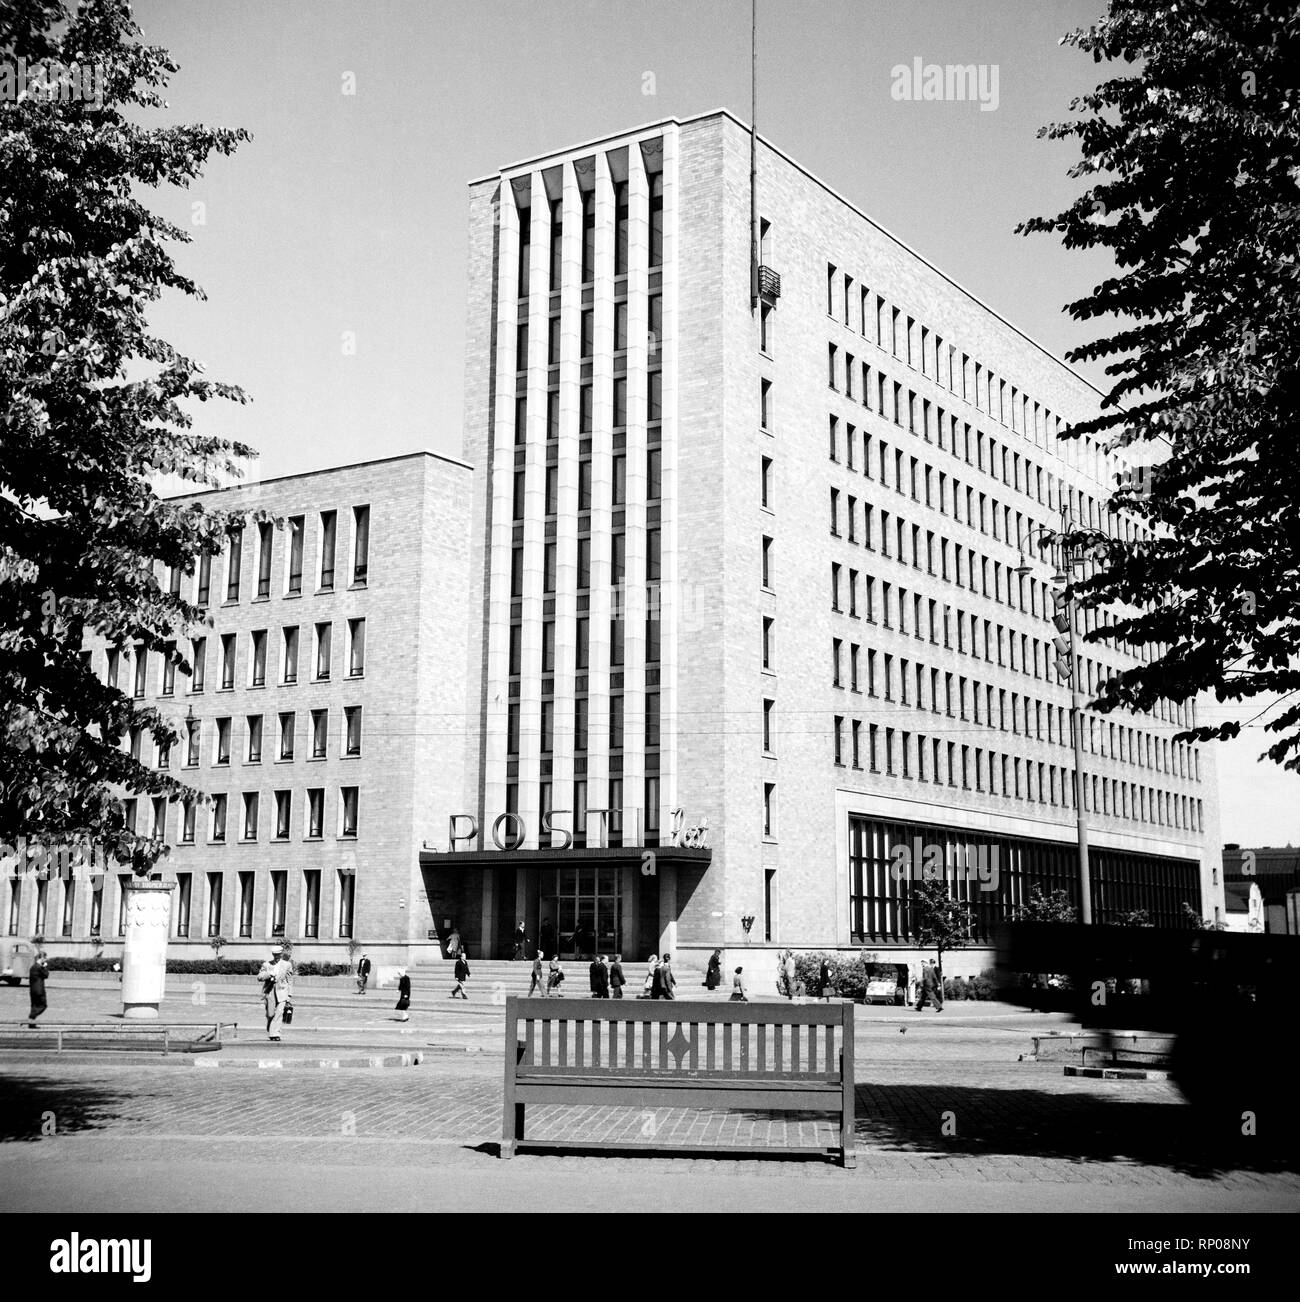 Helsinki 1947, Postitalo, General Post Office, the headquarters of Finnish postal and telegraph services is situated at the junction between Mannerheimintie and Postikatu. Stock Photo